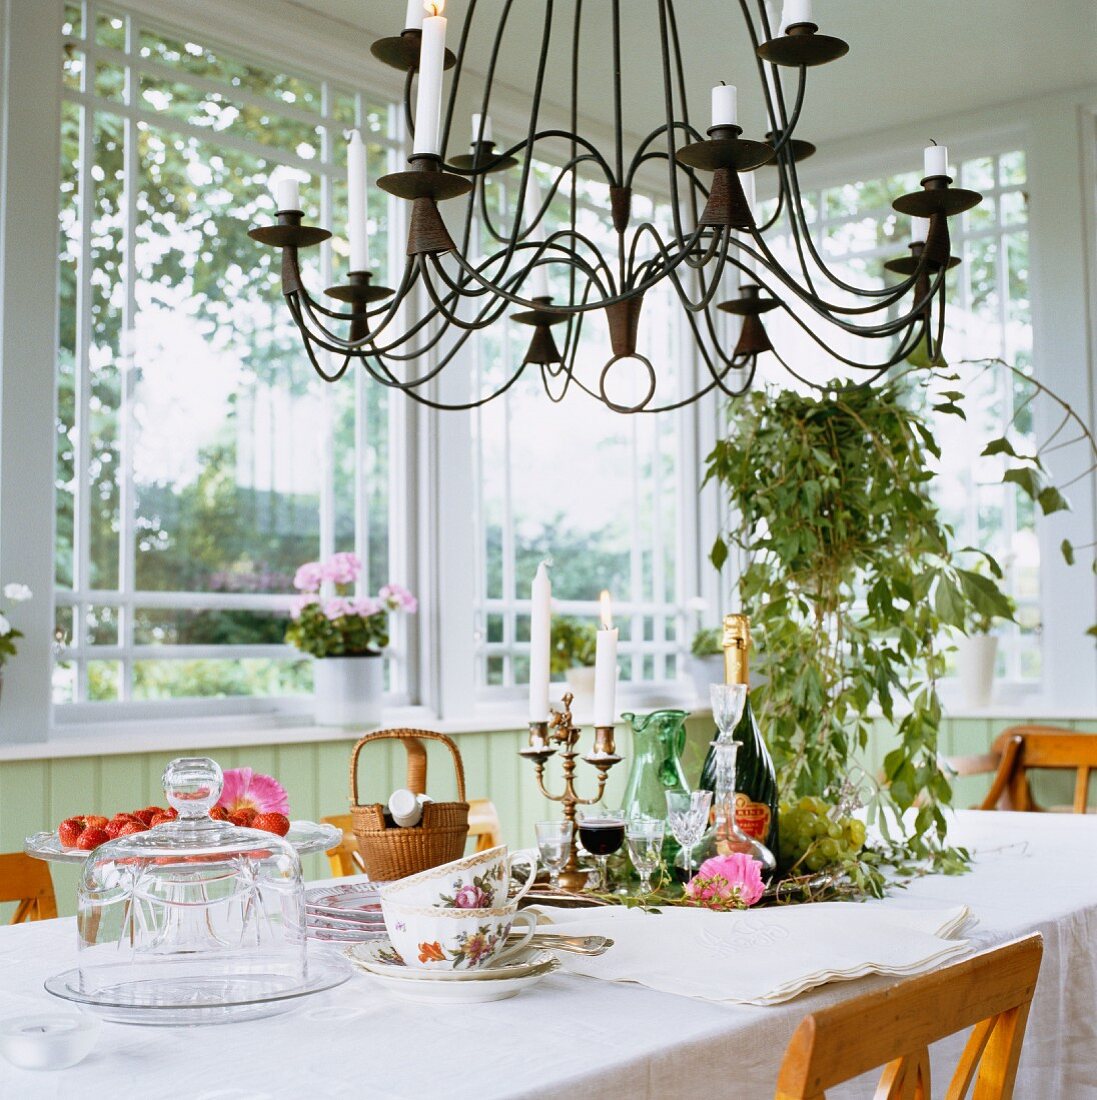 Wrought iron chandelier above white, set table in window bay